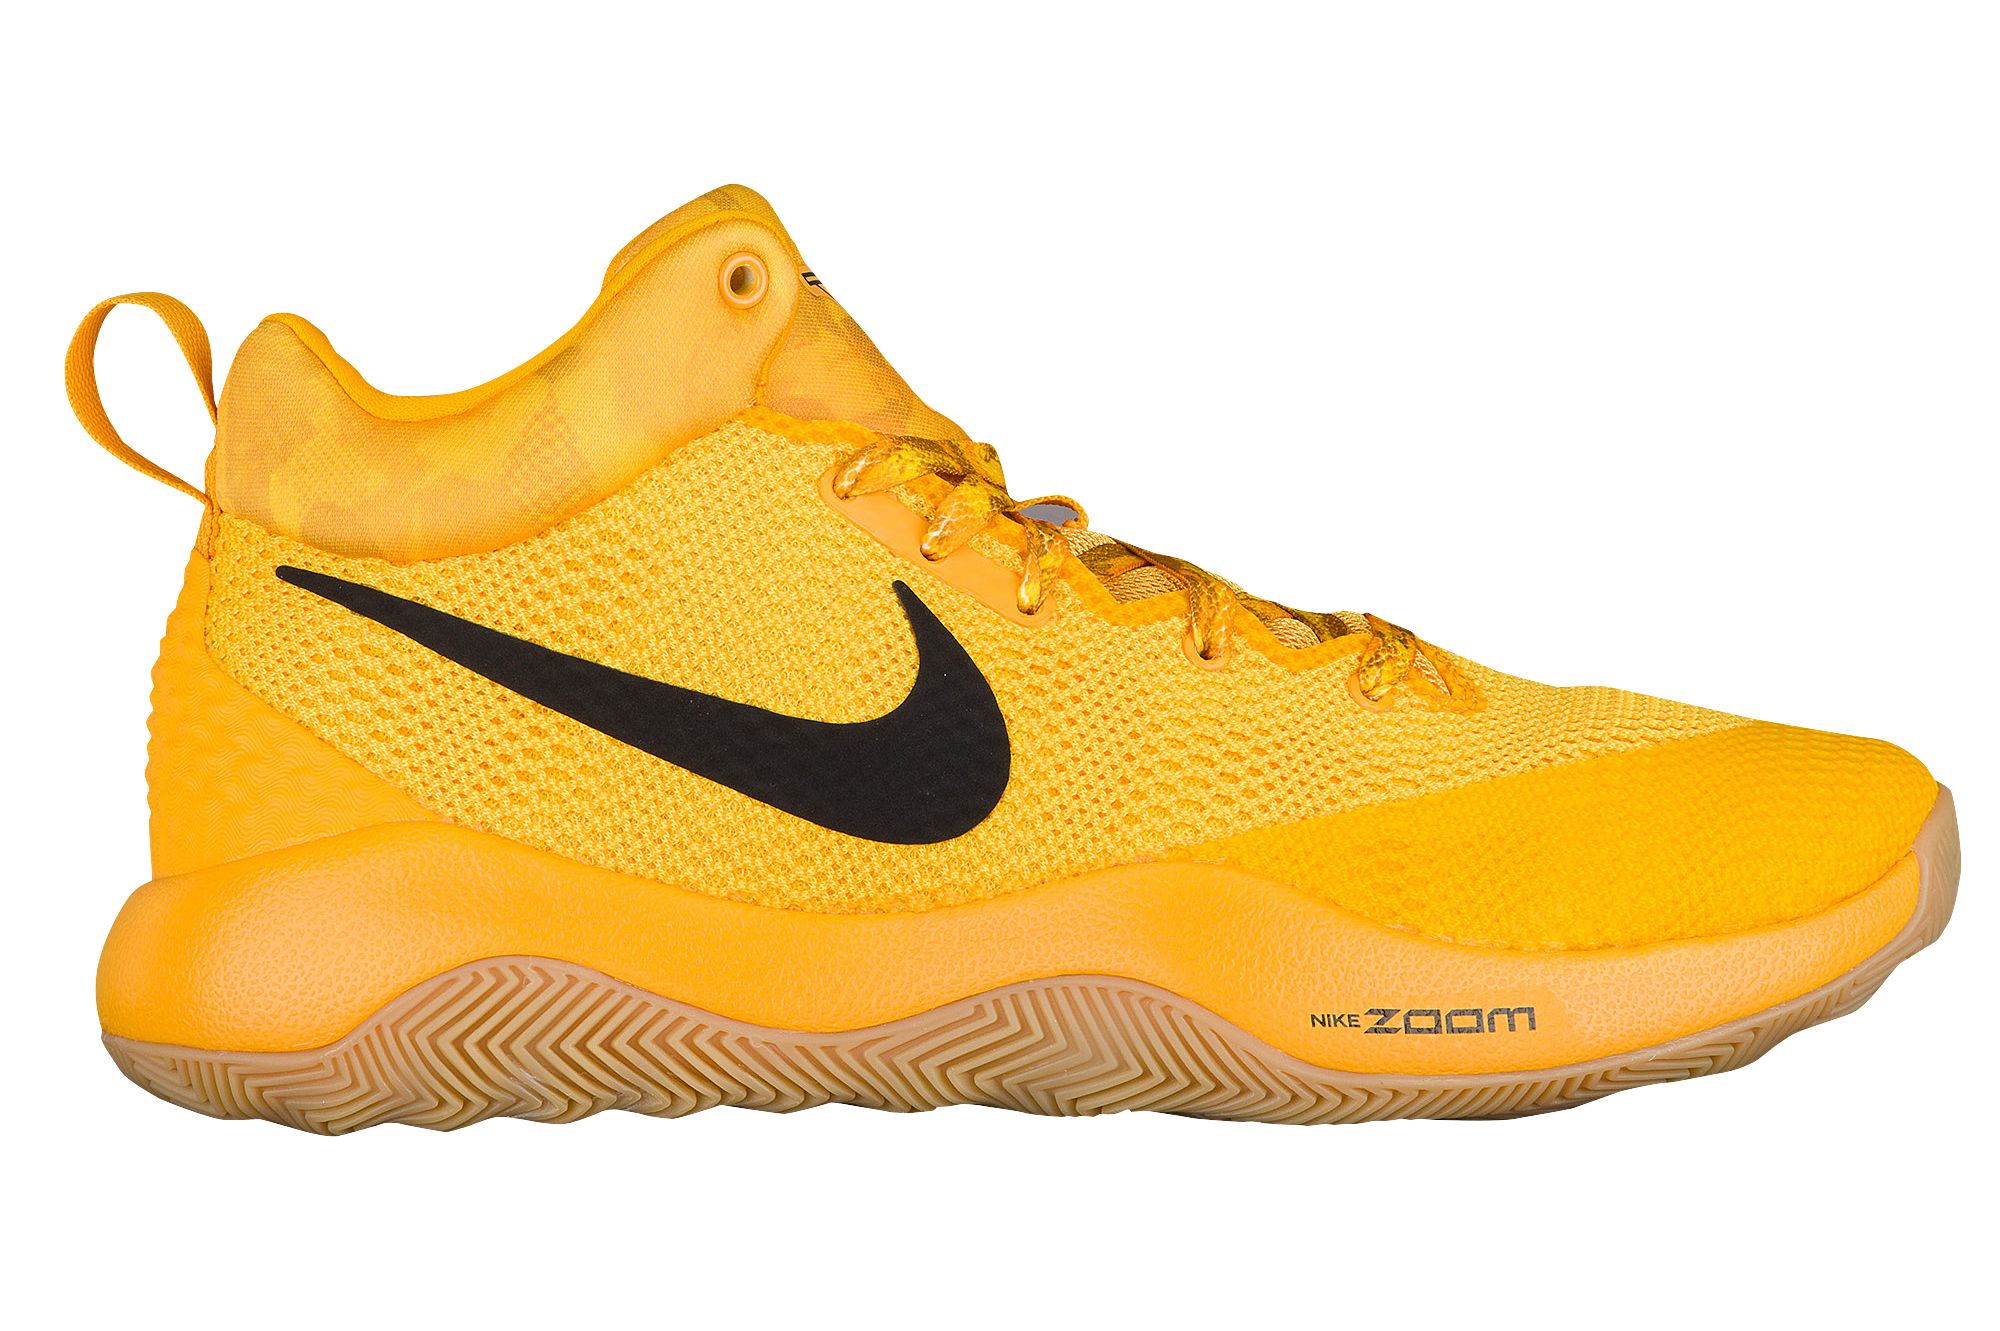 Nike Zoom rev - Tour Yellow - Side - WearTesters